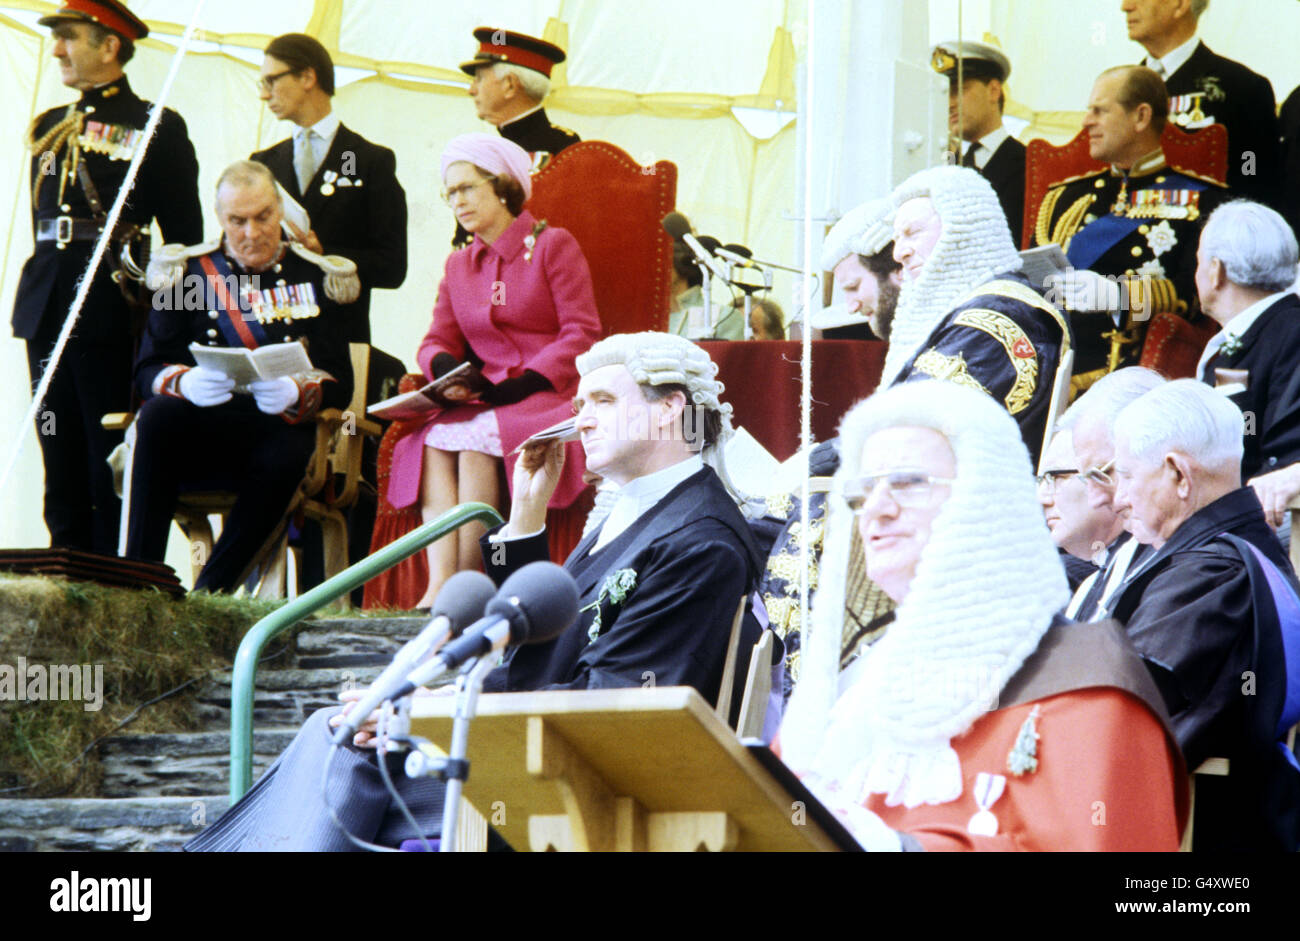 Queen Elizabeth II seated alongside Lt Governor Sir John Paul (left) when, in her capacity as Lord of Man, she attended the annual open air sitting of the Tynwald, the legislature of the Isle of Man. The ceremony was a climax to the Tynwald's millennium celebrations. It is claimed to be the oldest continuous parliamentary body in the world. Stock Photo